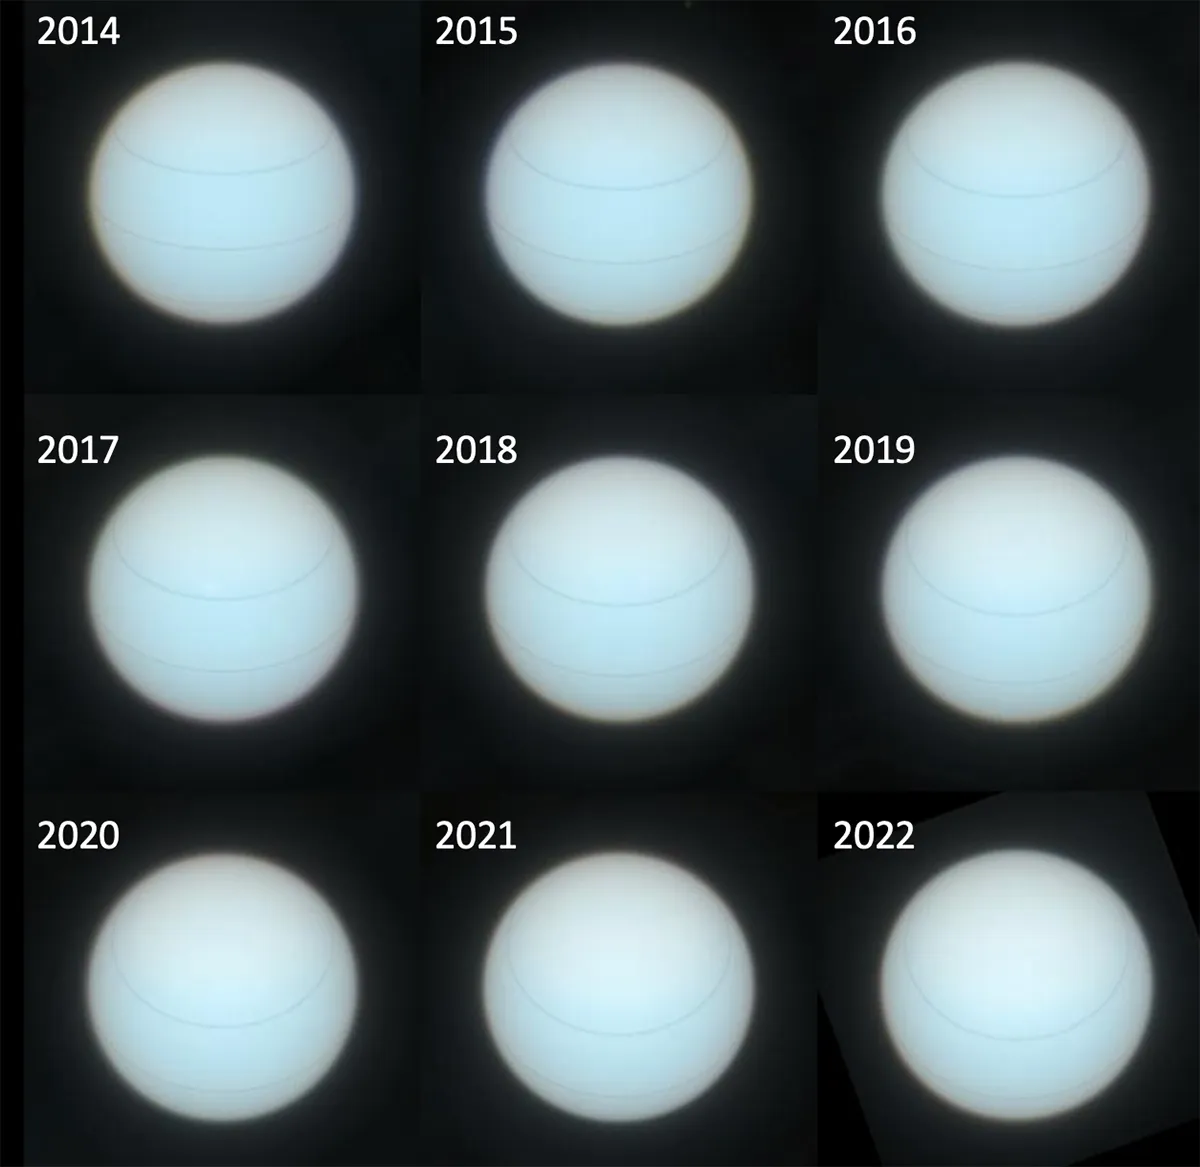 Uranus as seen by the Hubble Space Telescope's Wide Field Camera 3 from 2015-2022. During this sequence the north pole, which has a paler green colour, swings down towards the Sun and Earth. In these images the equator and latitude lines at 35N and 35S are marked.